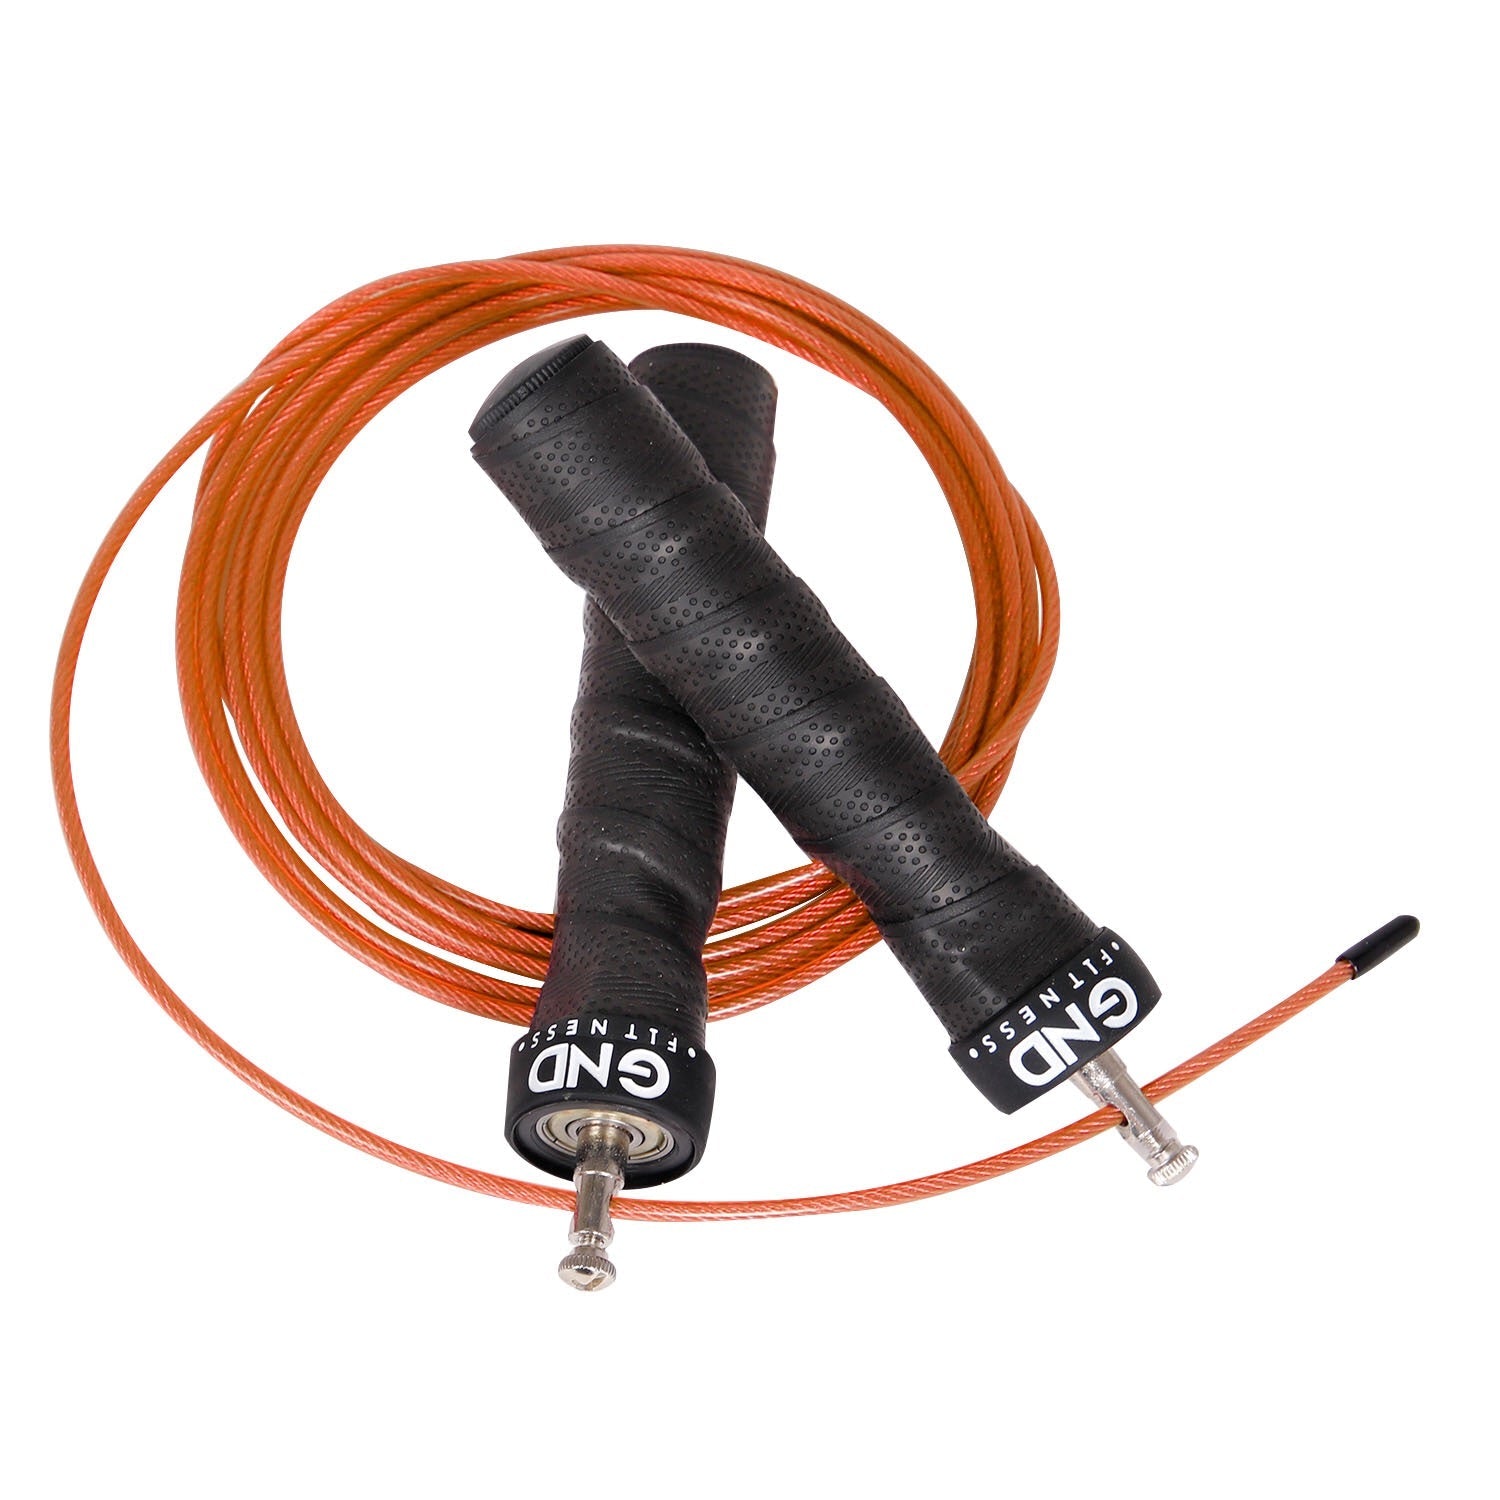 GND SR Speed Skipping Rope // Single Ball Bearing // Electric Orange - SR Skipping Rope- GND Fitness